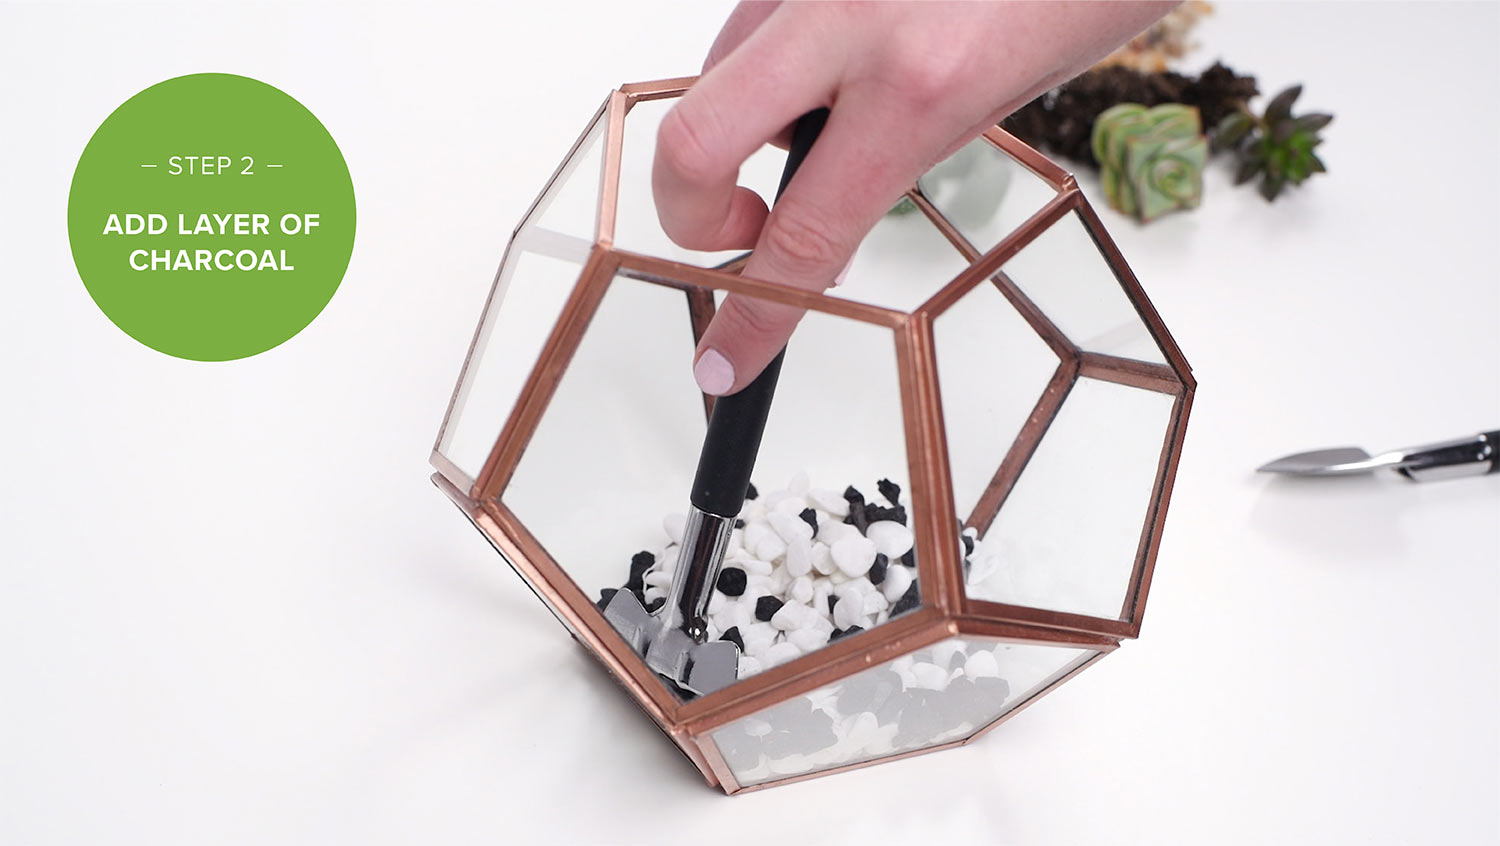 How to Start a Terrarium in 5 Easy Steps